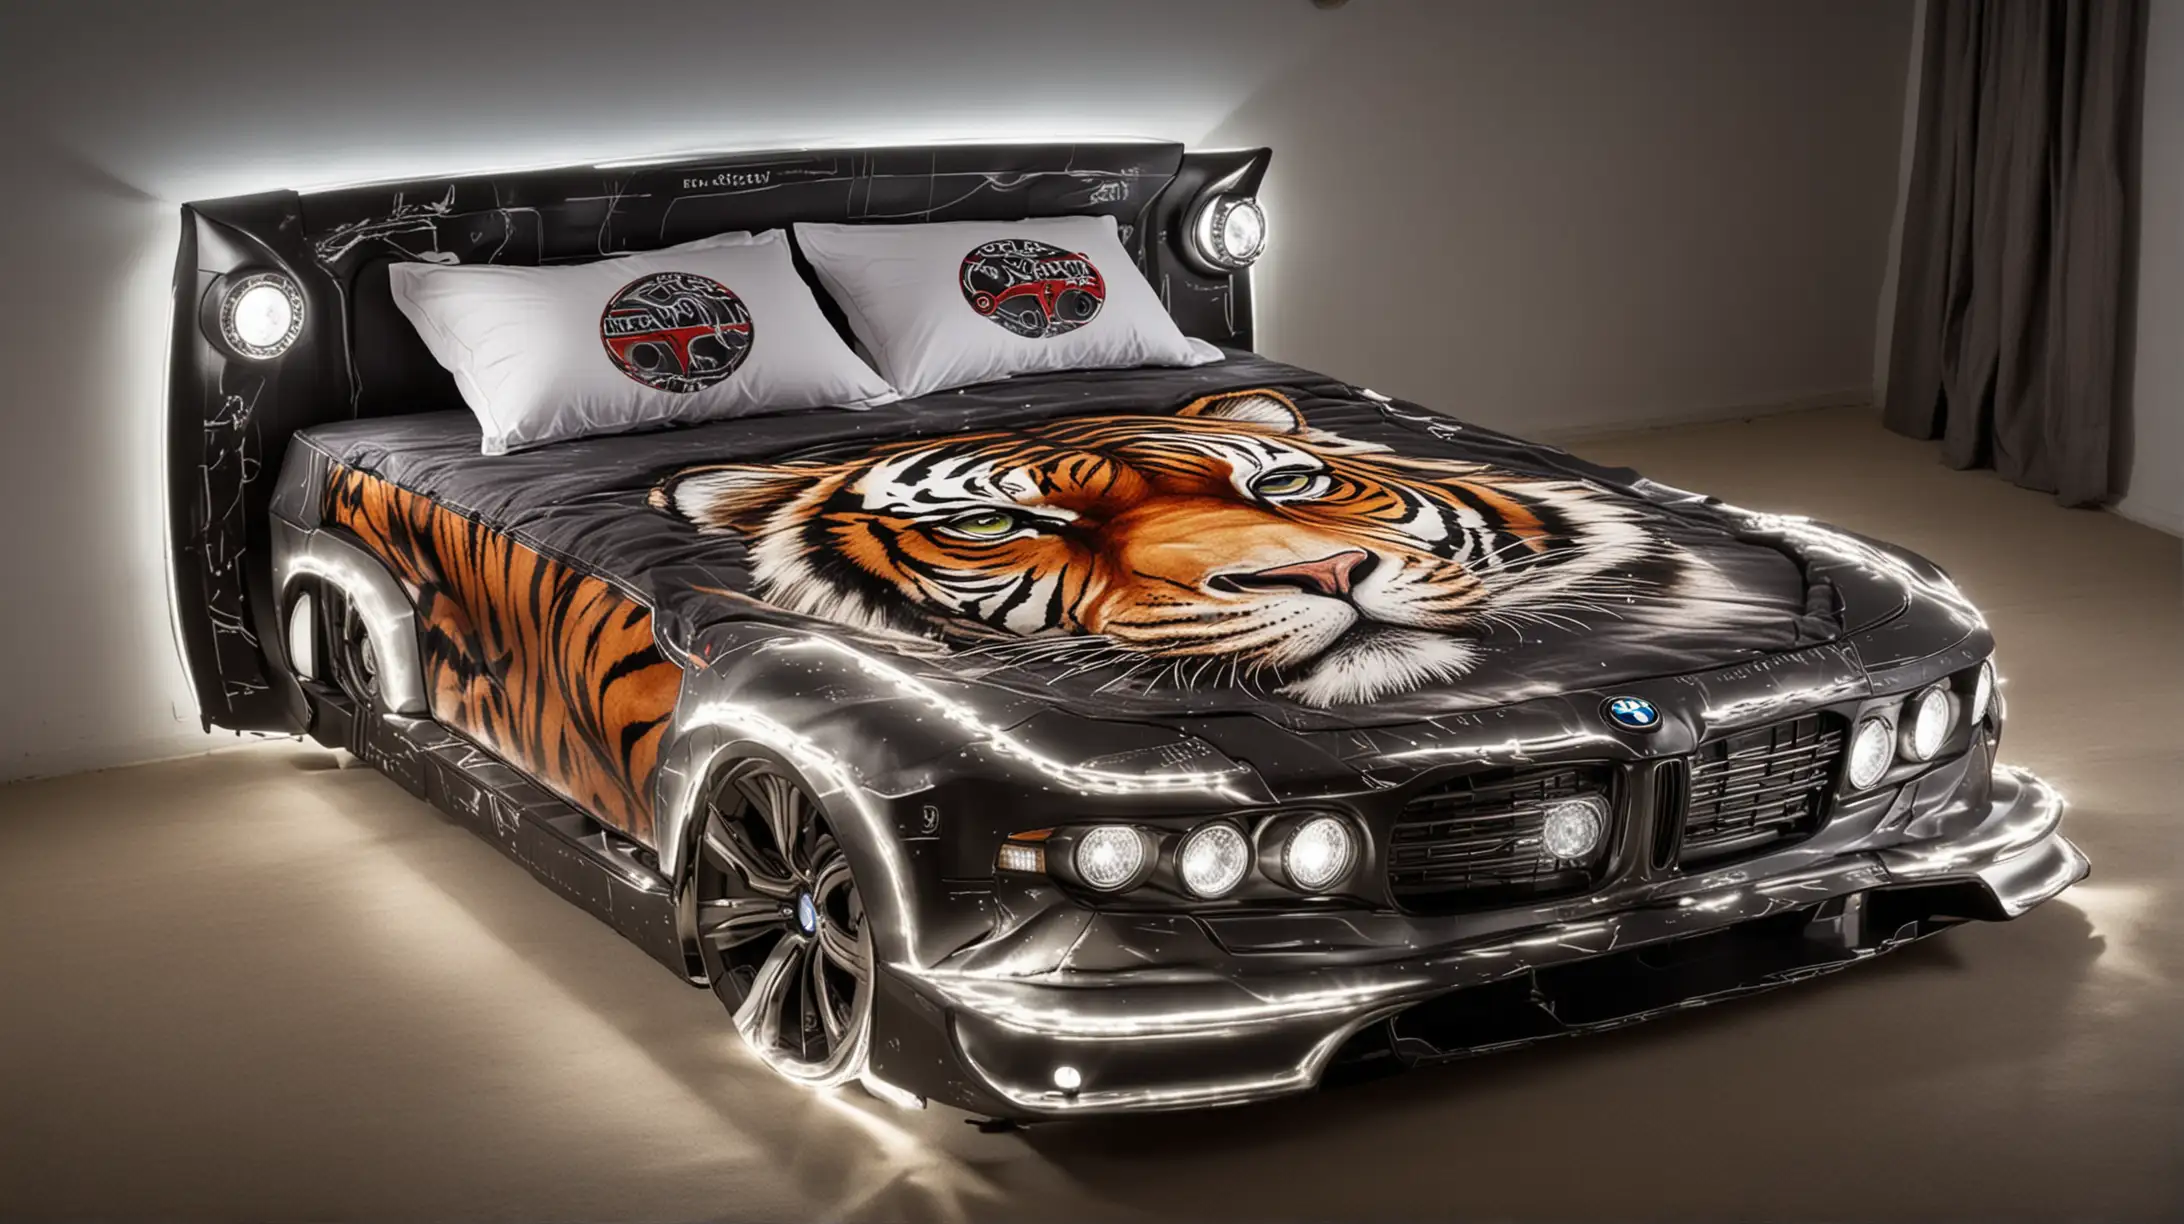 BMW Car Shaped Double Bed with Evil and Kind Tiger Graphics